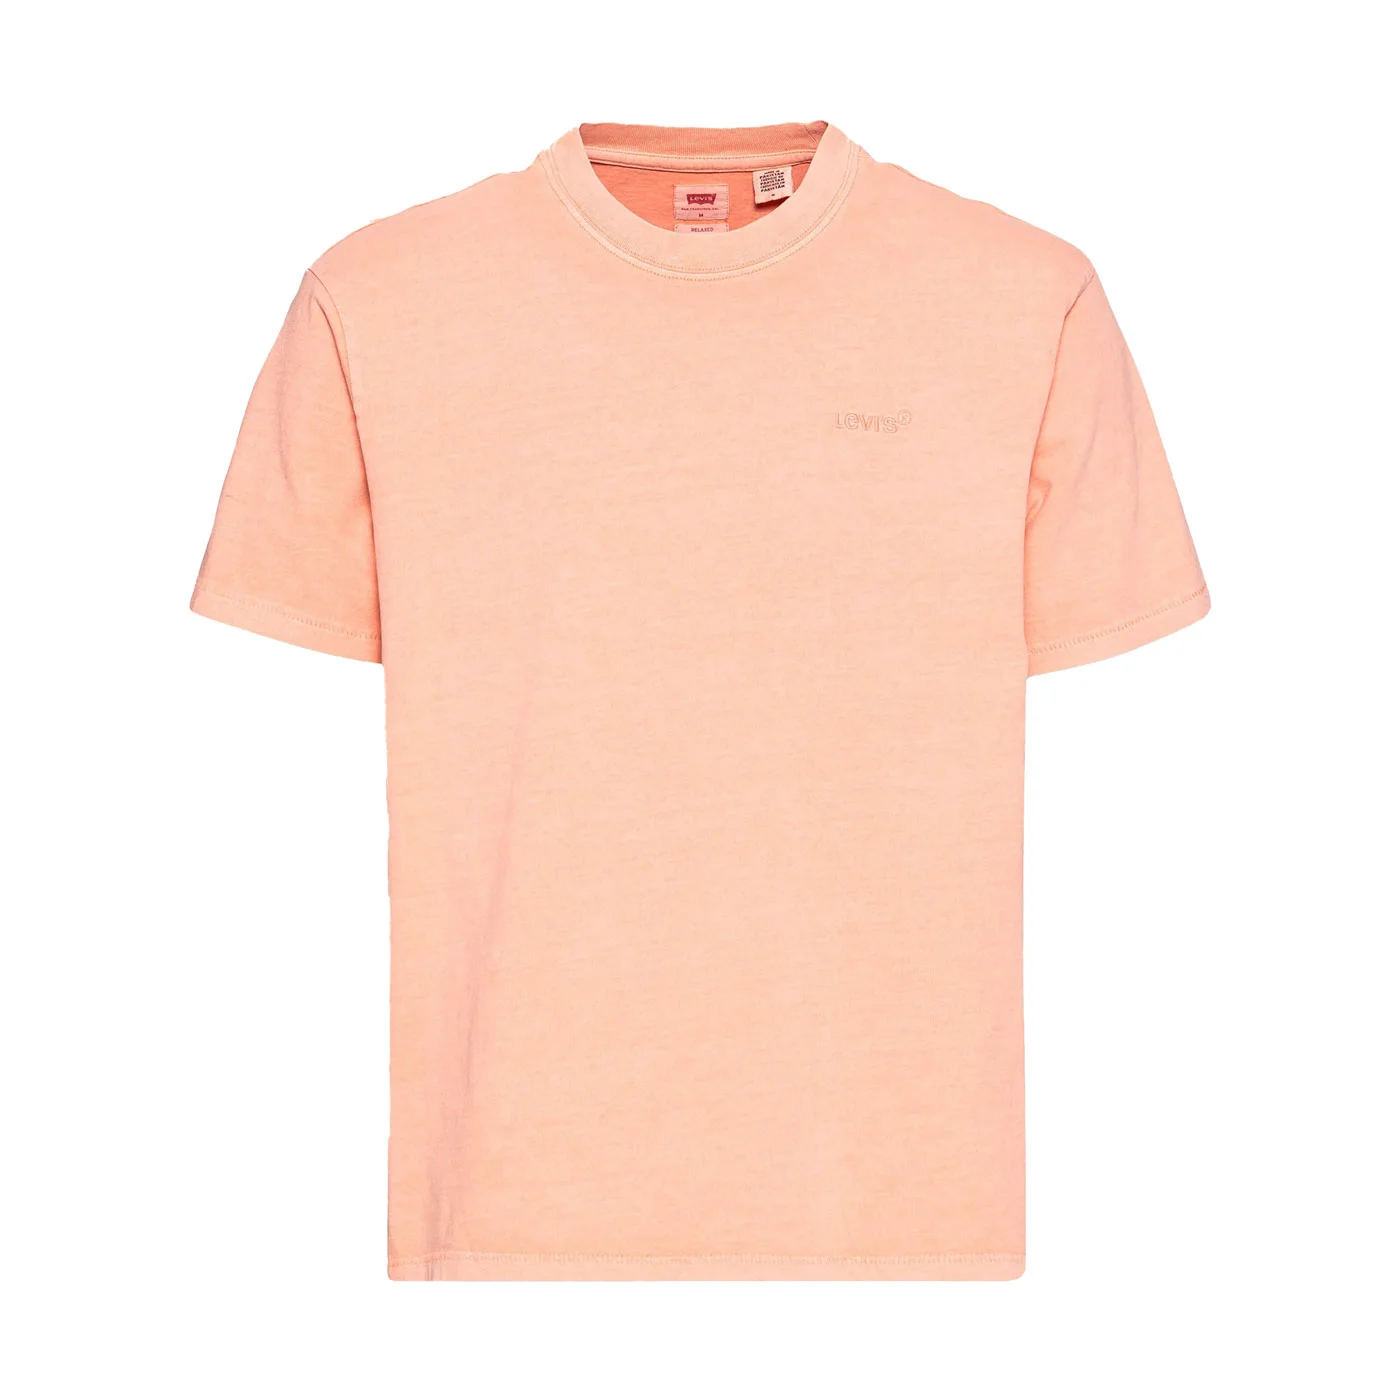 Levis Red Tab Vintage Tee - Desaturated Pink/Light Red